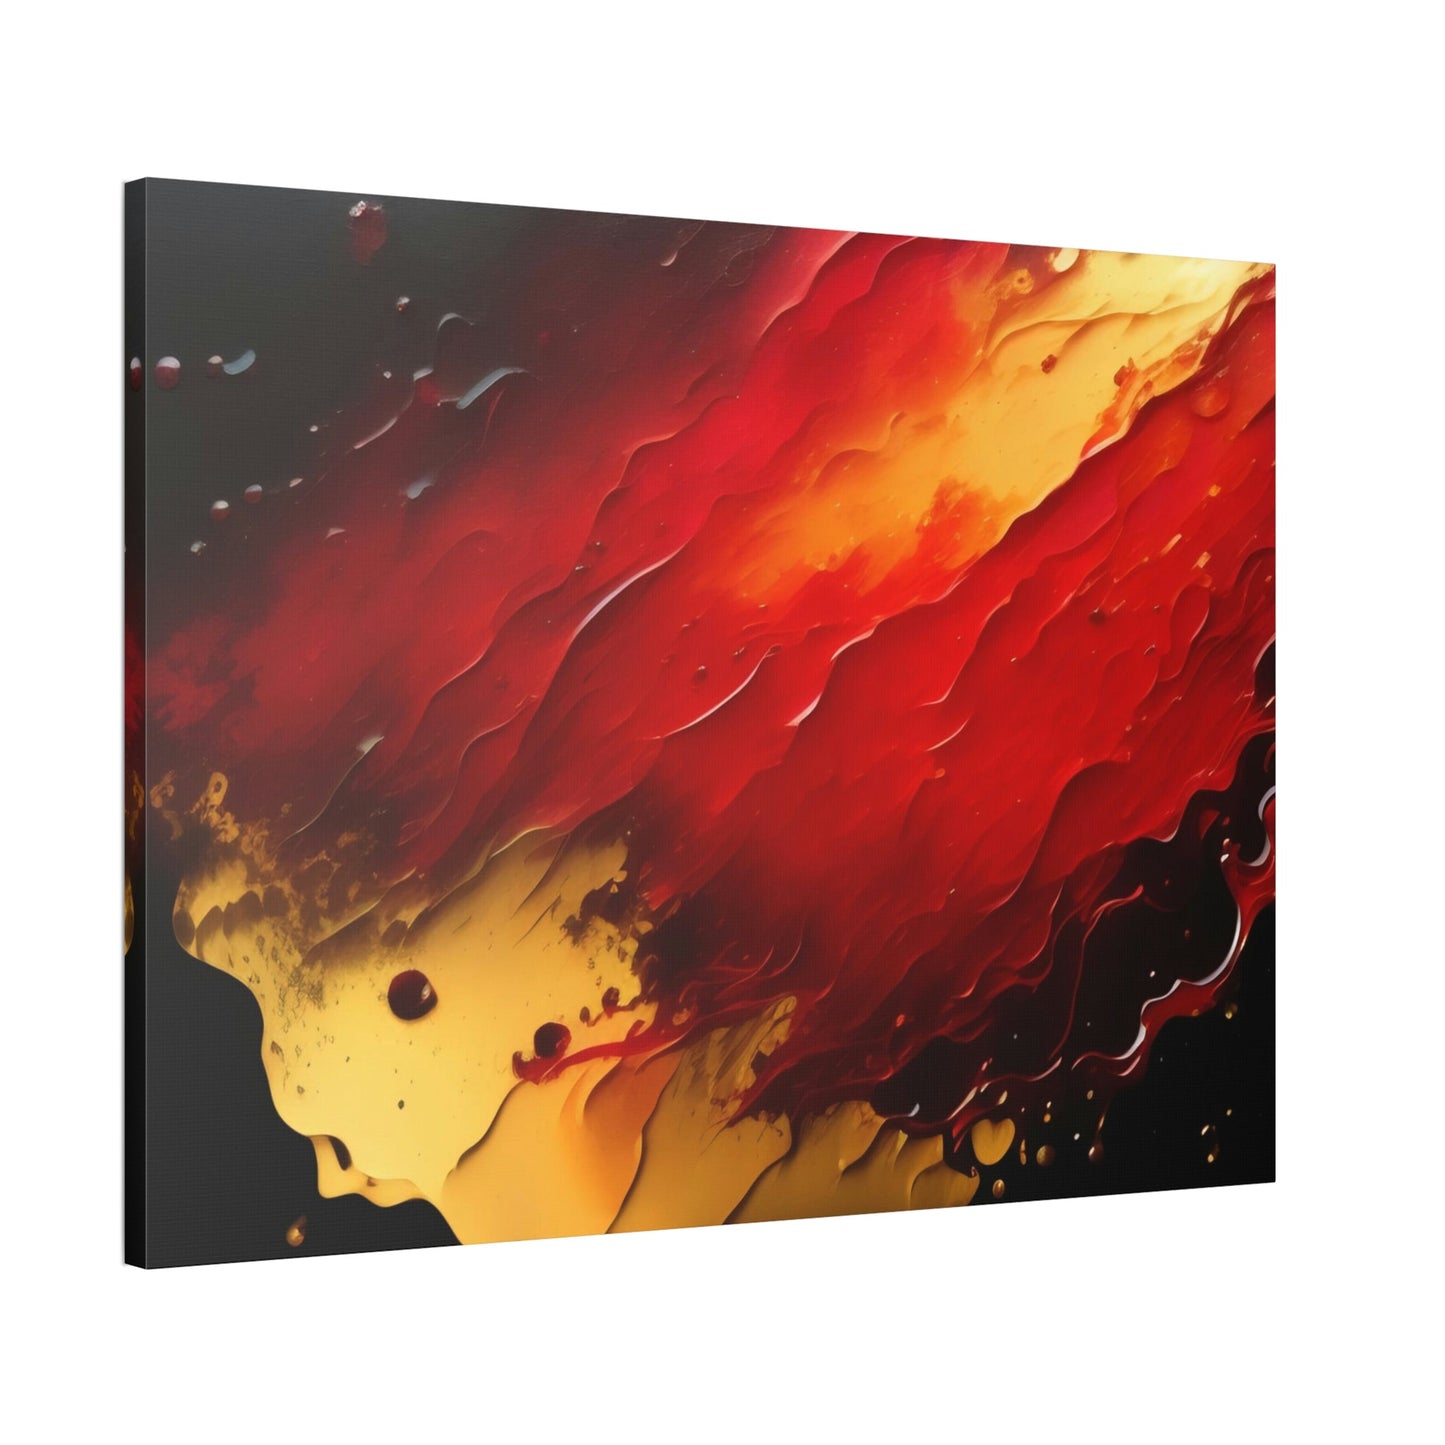 Shades of Passion: A Red Abstract Art Print on Poster and Canvas